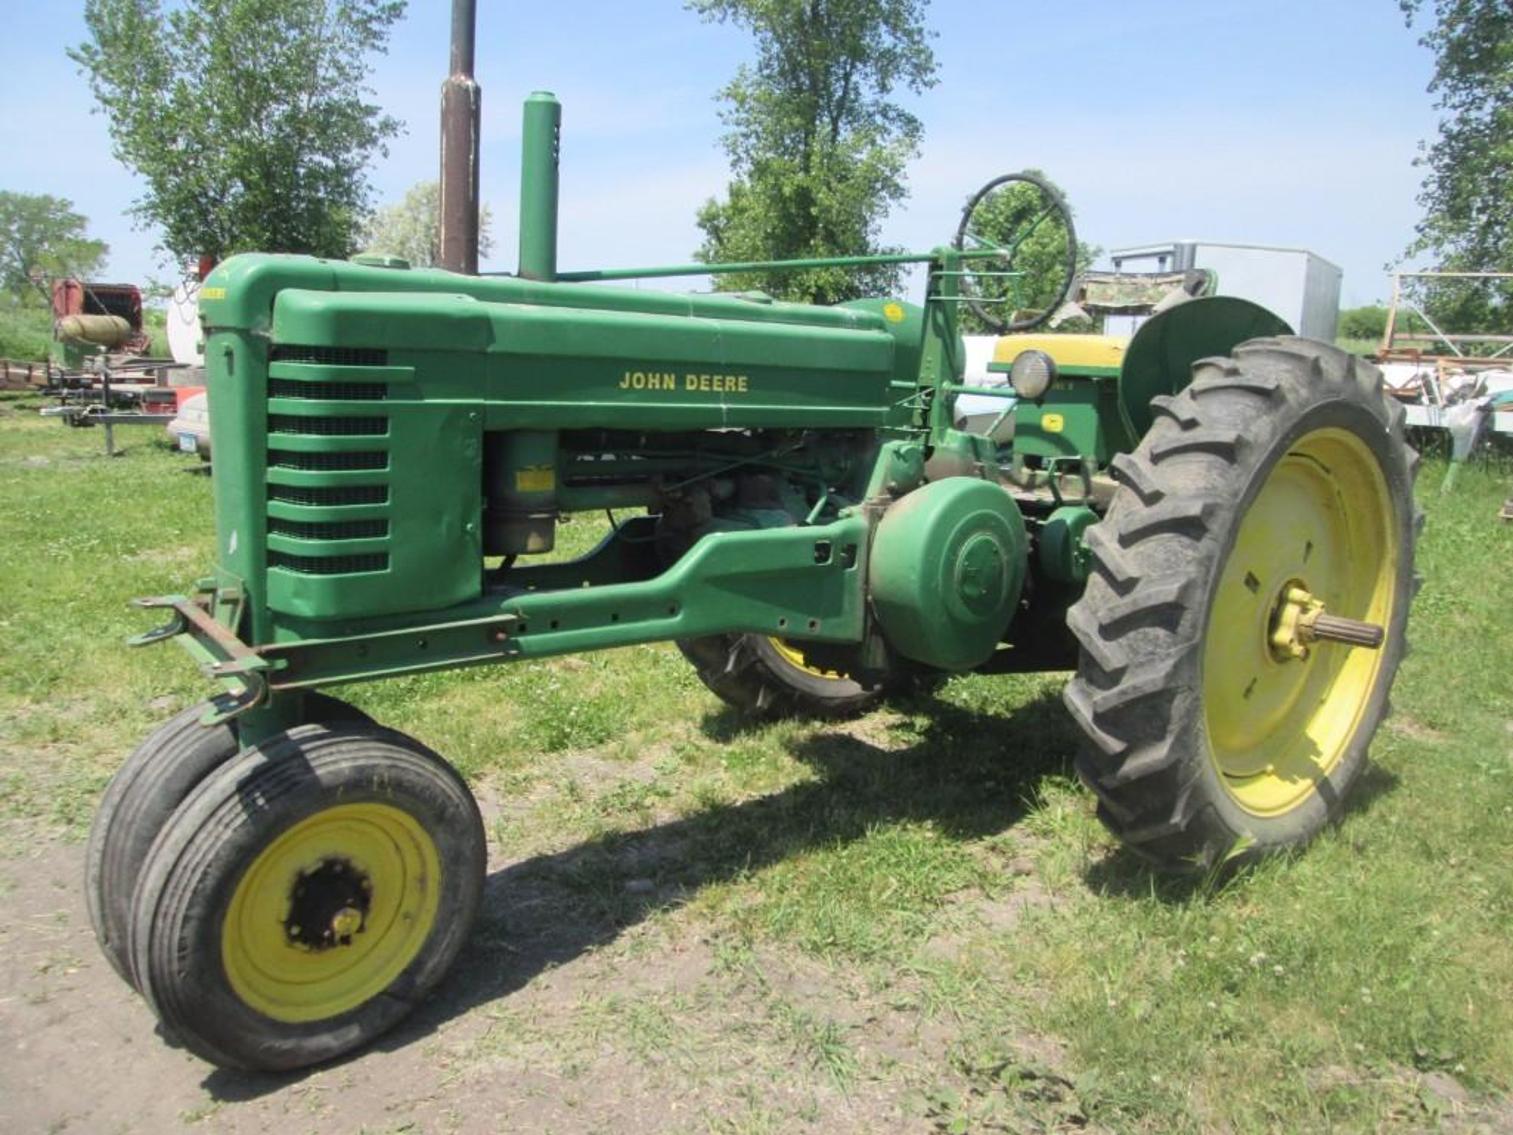 Farm Equipment, Truck, Trailers, Vehicles, Tires and Misc.